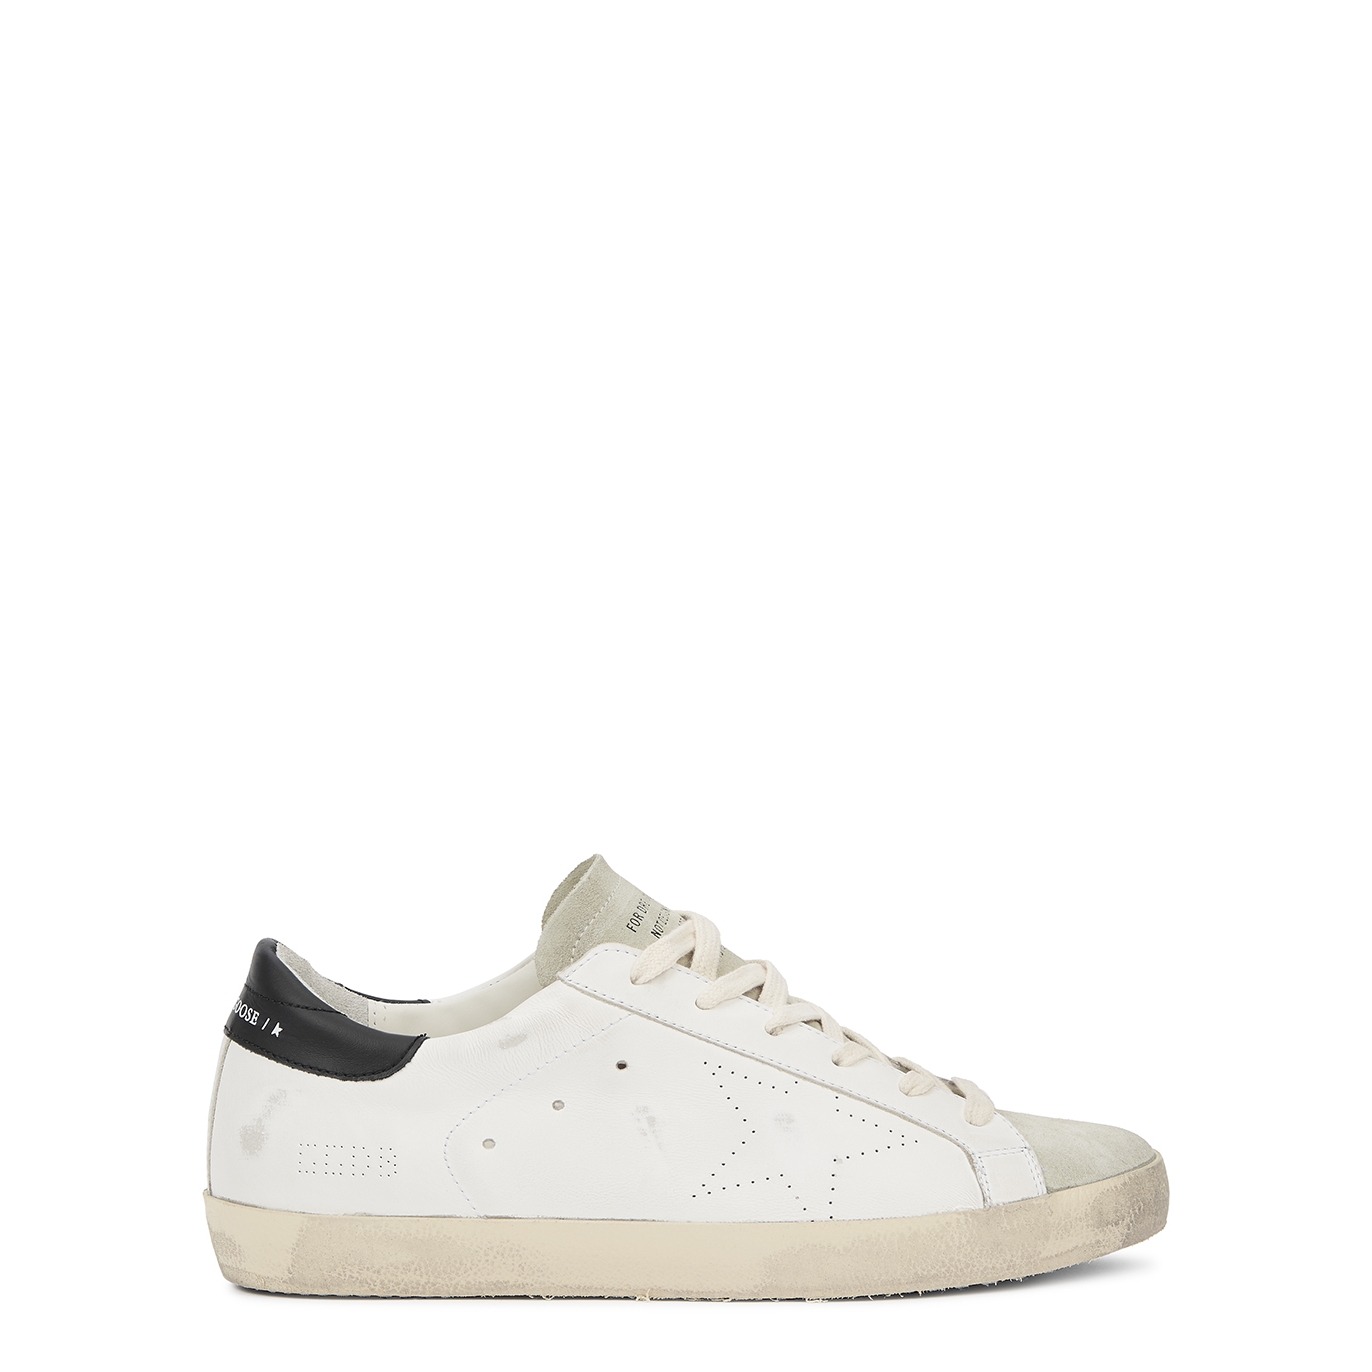 Golden Goose Superstar Distressed Leather Sneakers - White And Black - 4